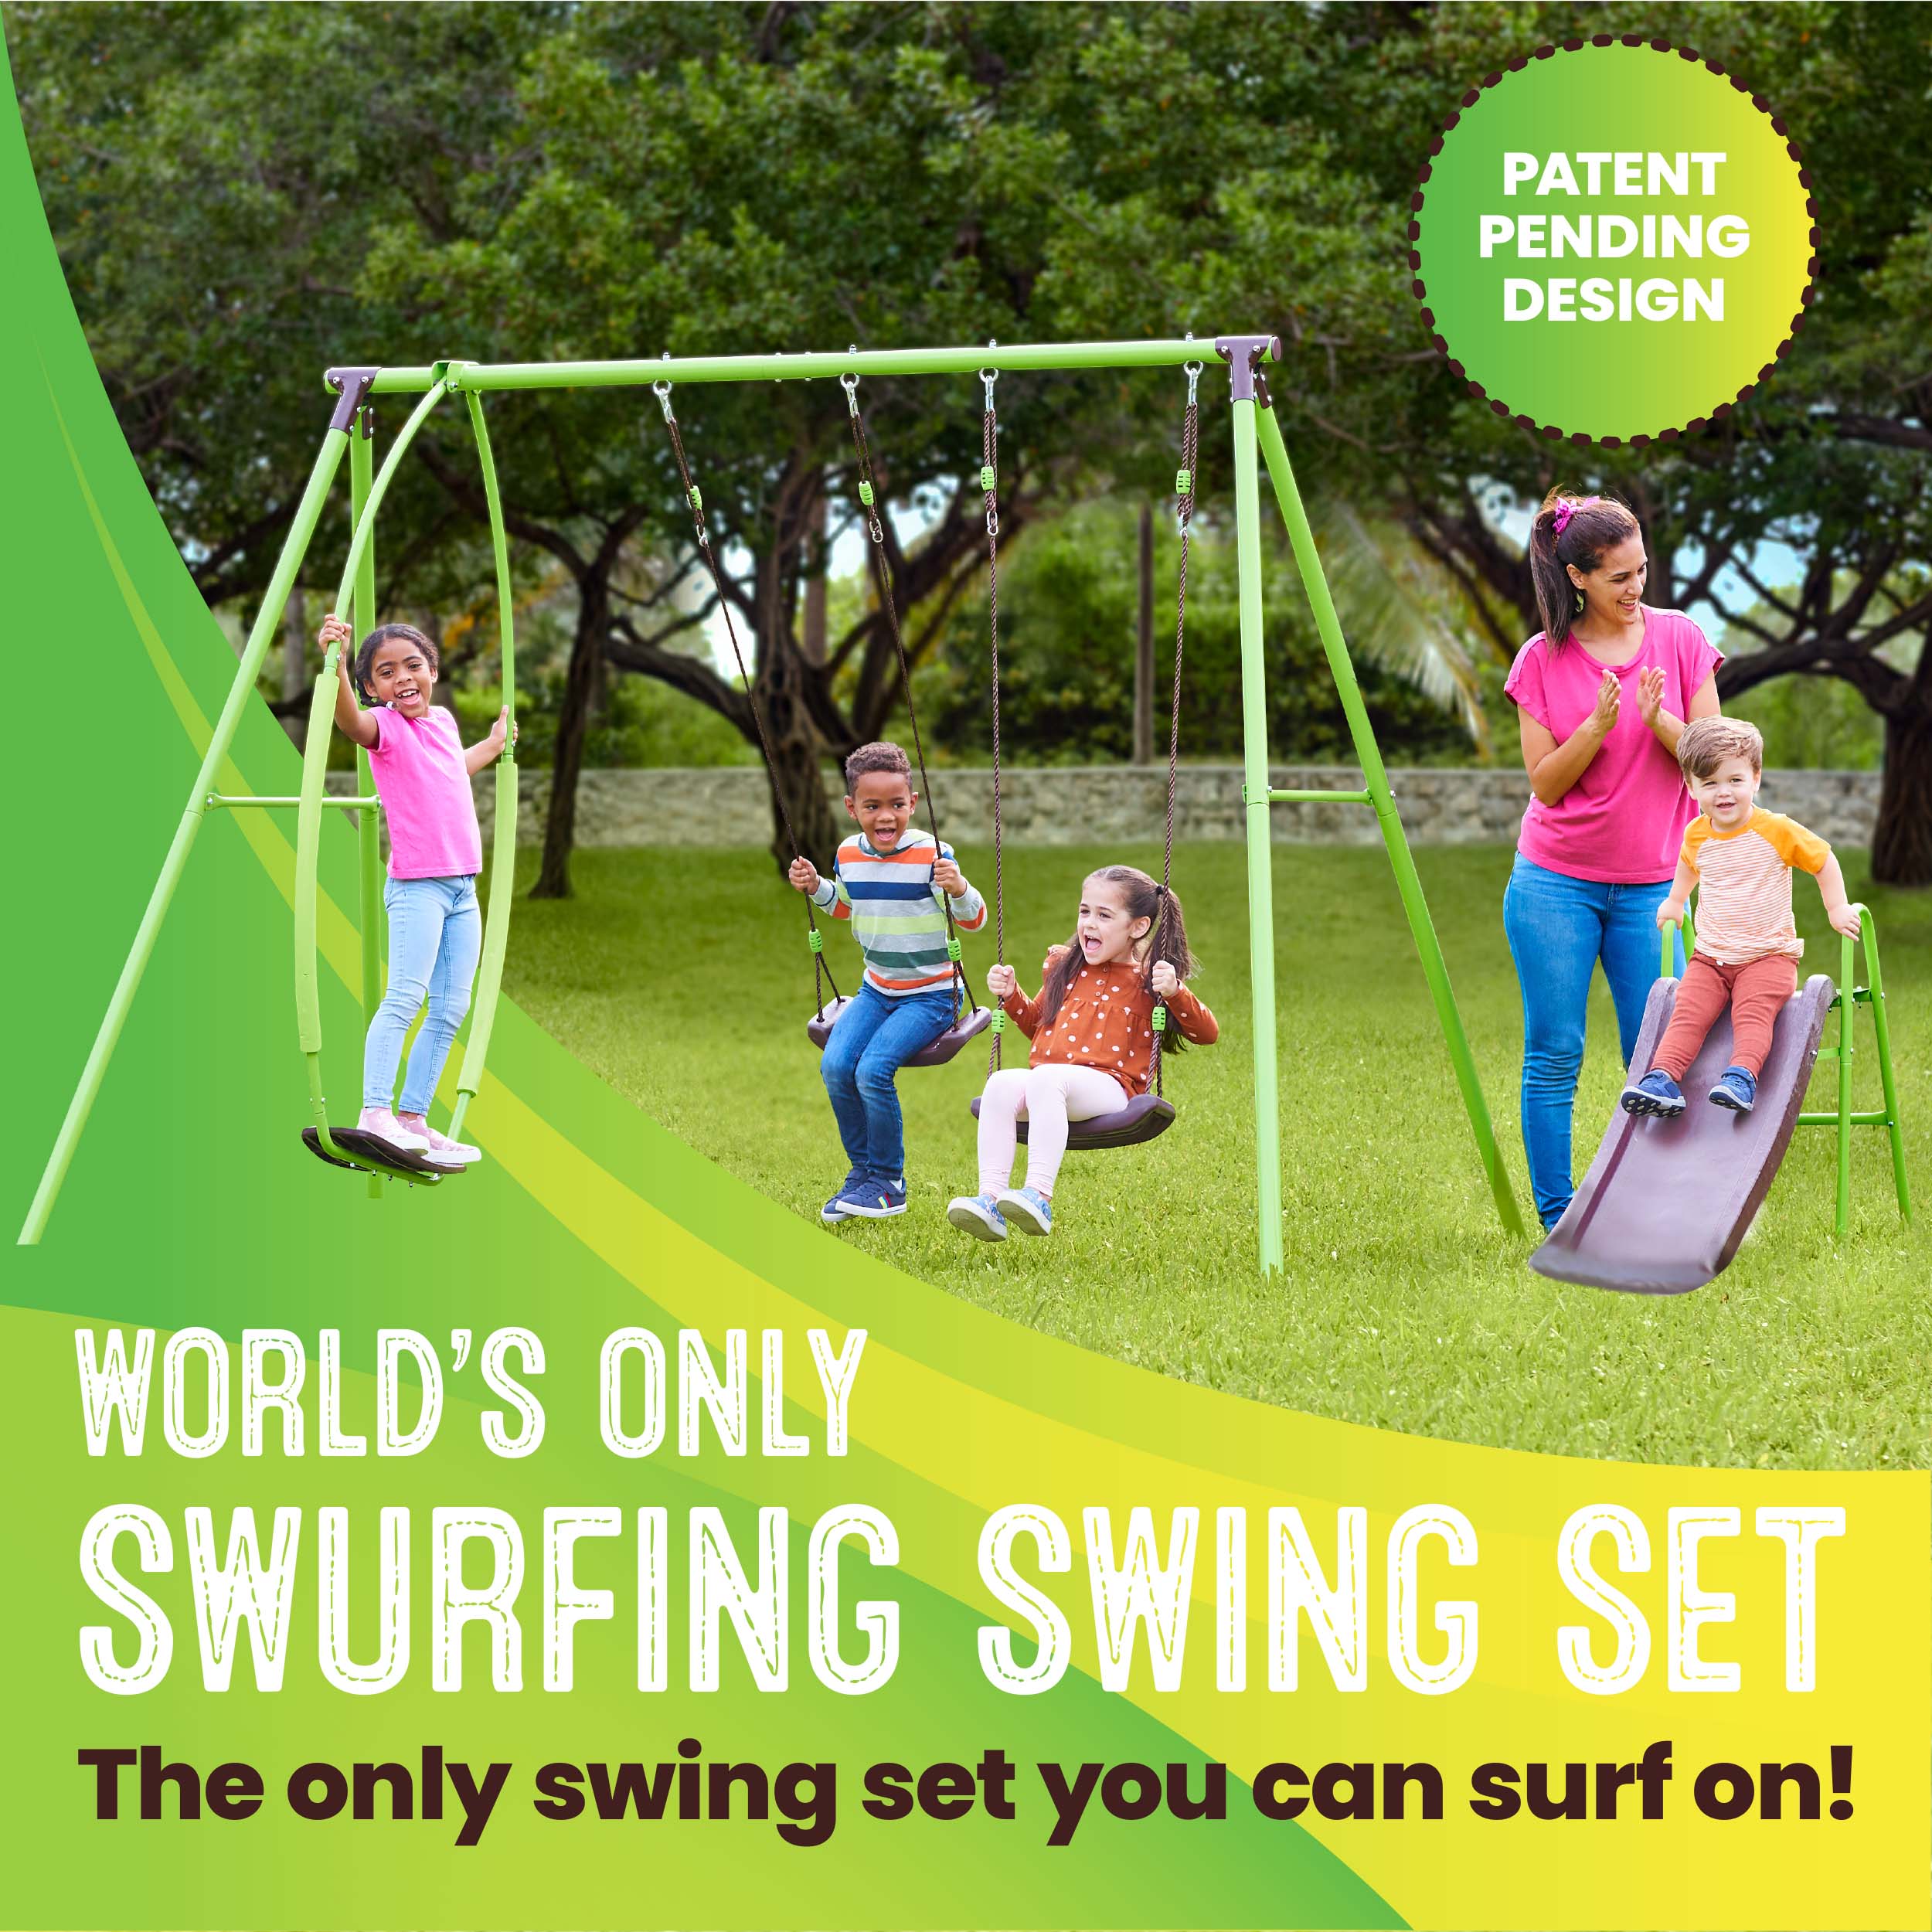 Swurfer Triple Steel Swing Set with Slide for Backyard, Playset for Kids 3 Years and Up, Holds 4 kids at once